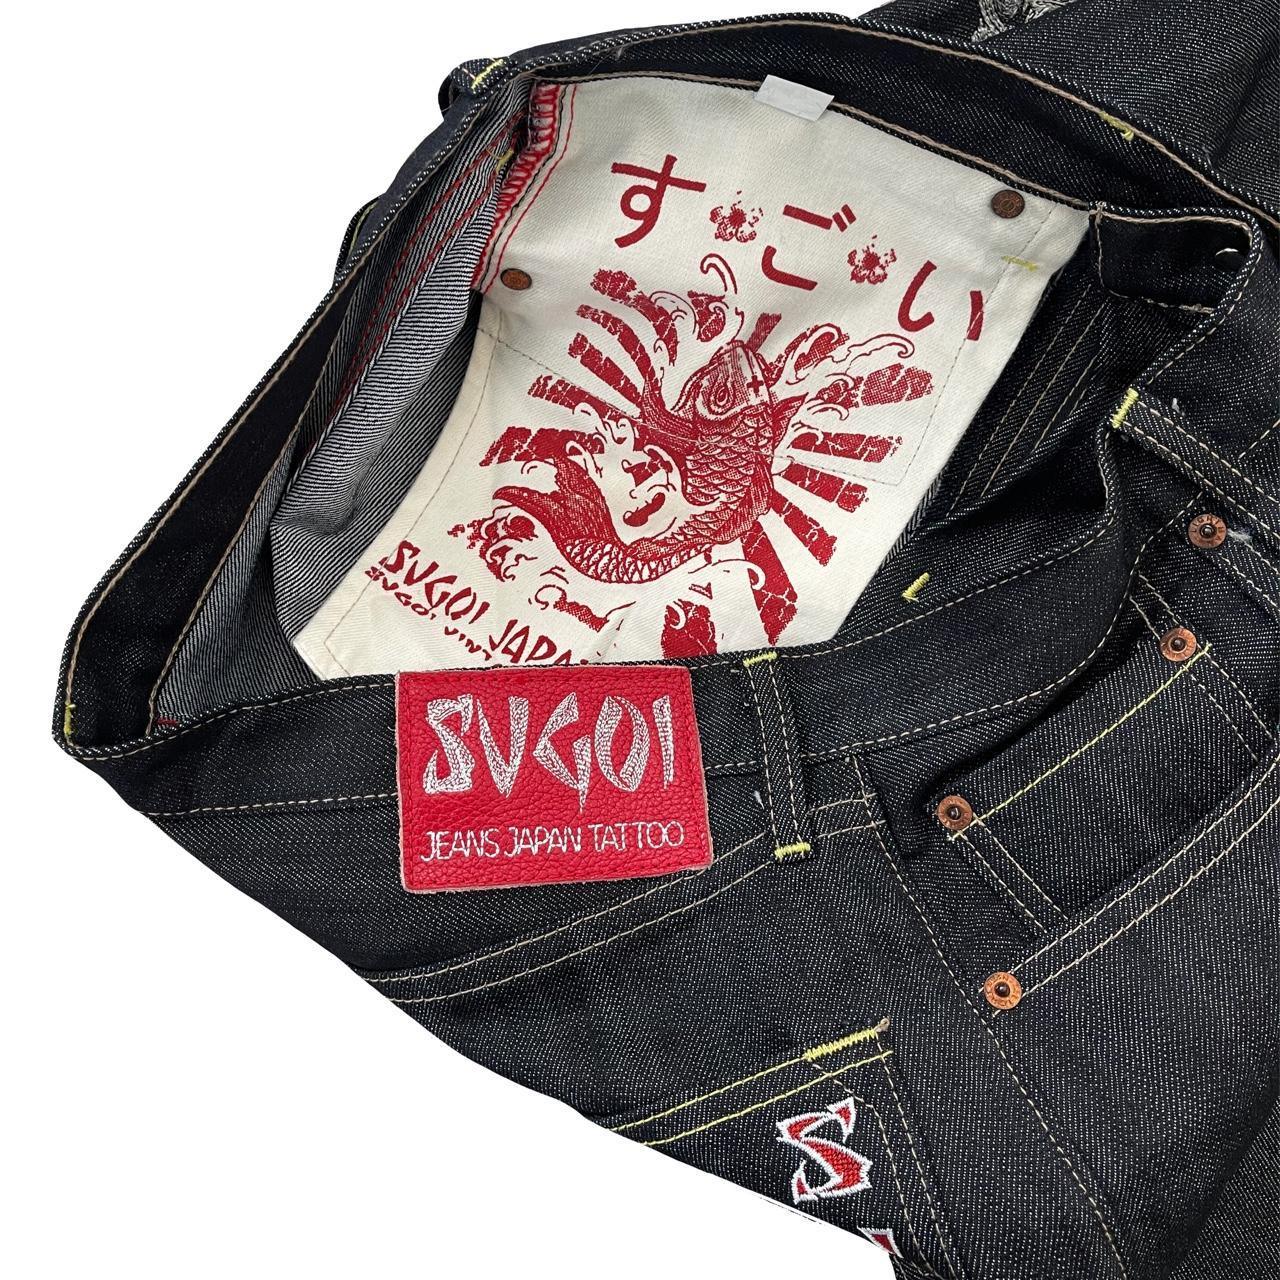 Sugoi Jeans - Known Source